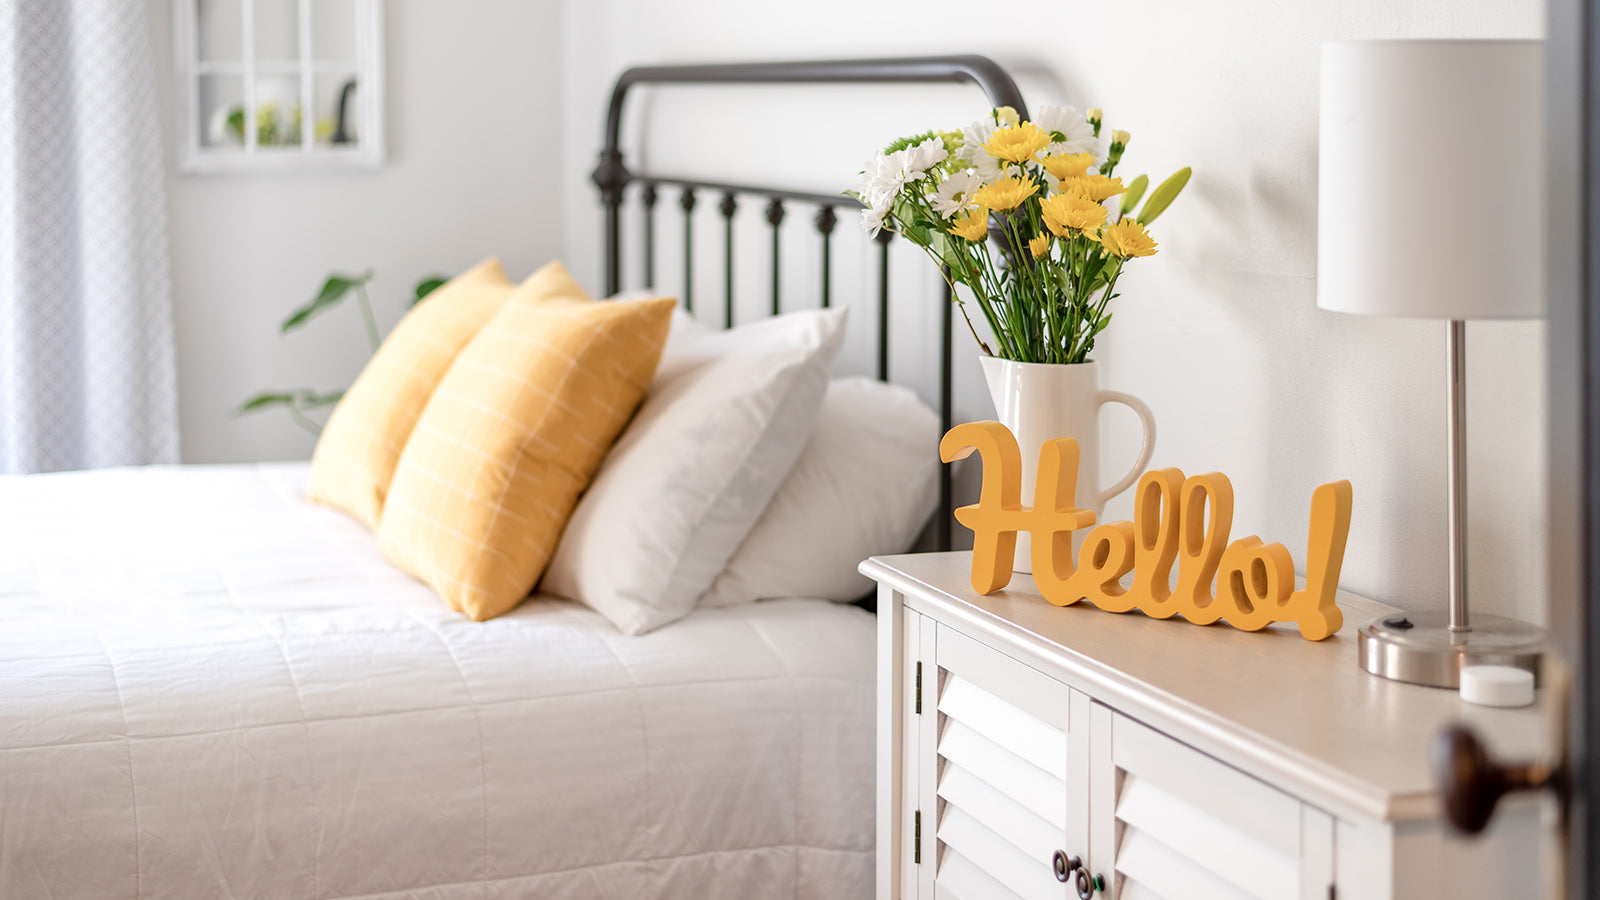 A clean bedroom with a white bedspread and yellow accents